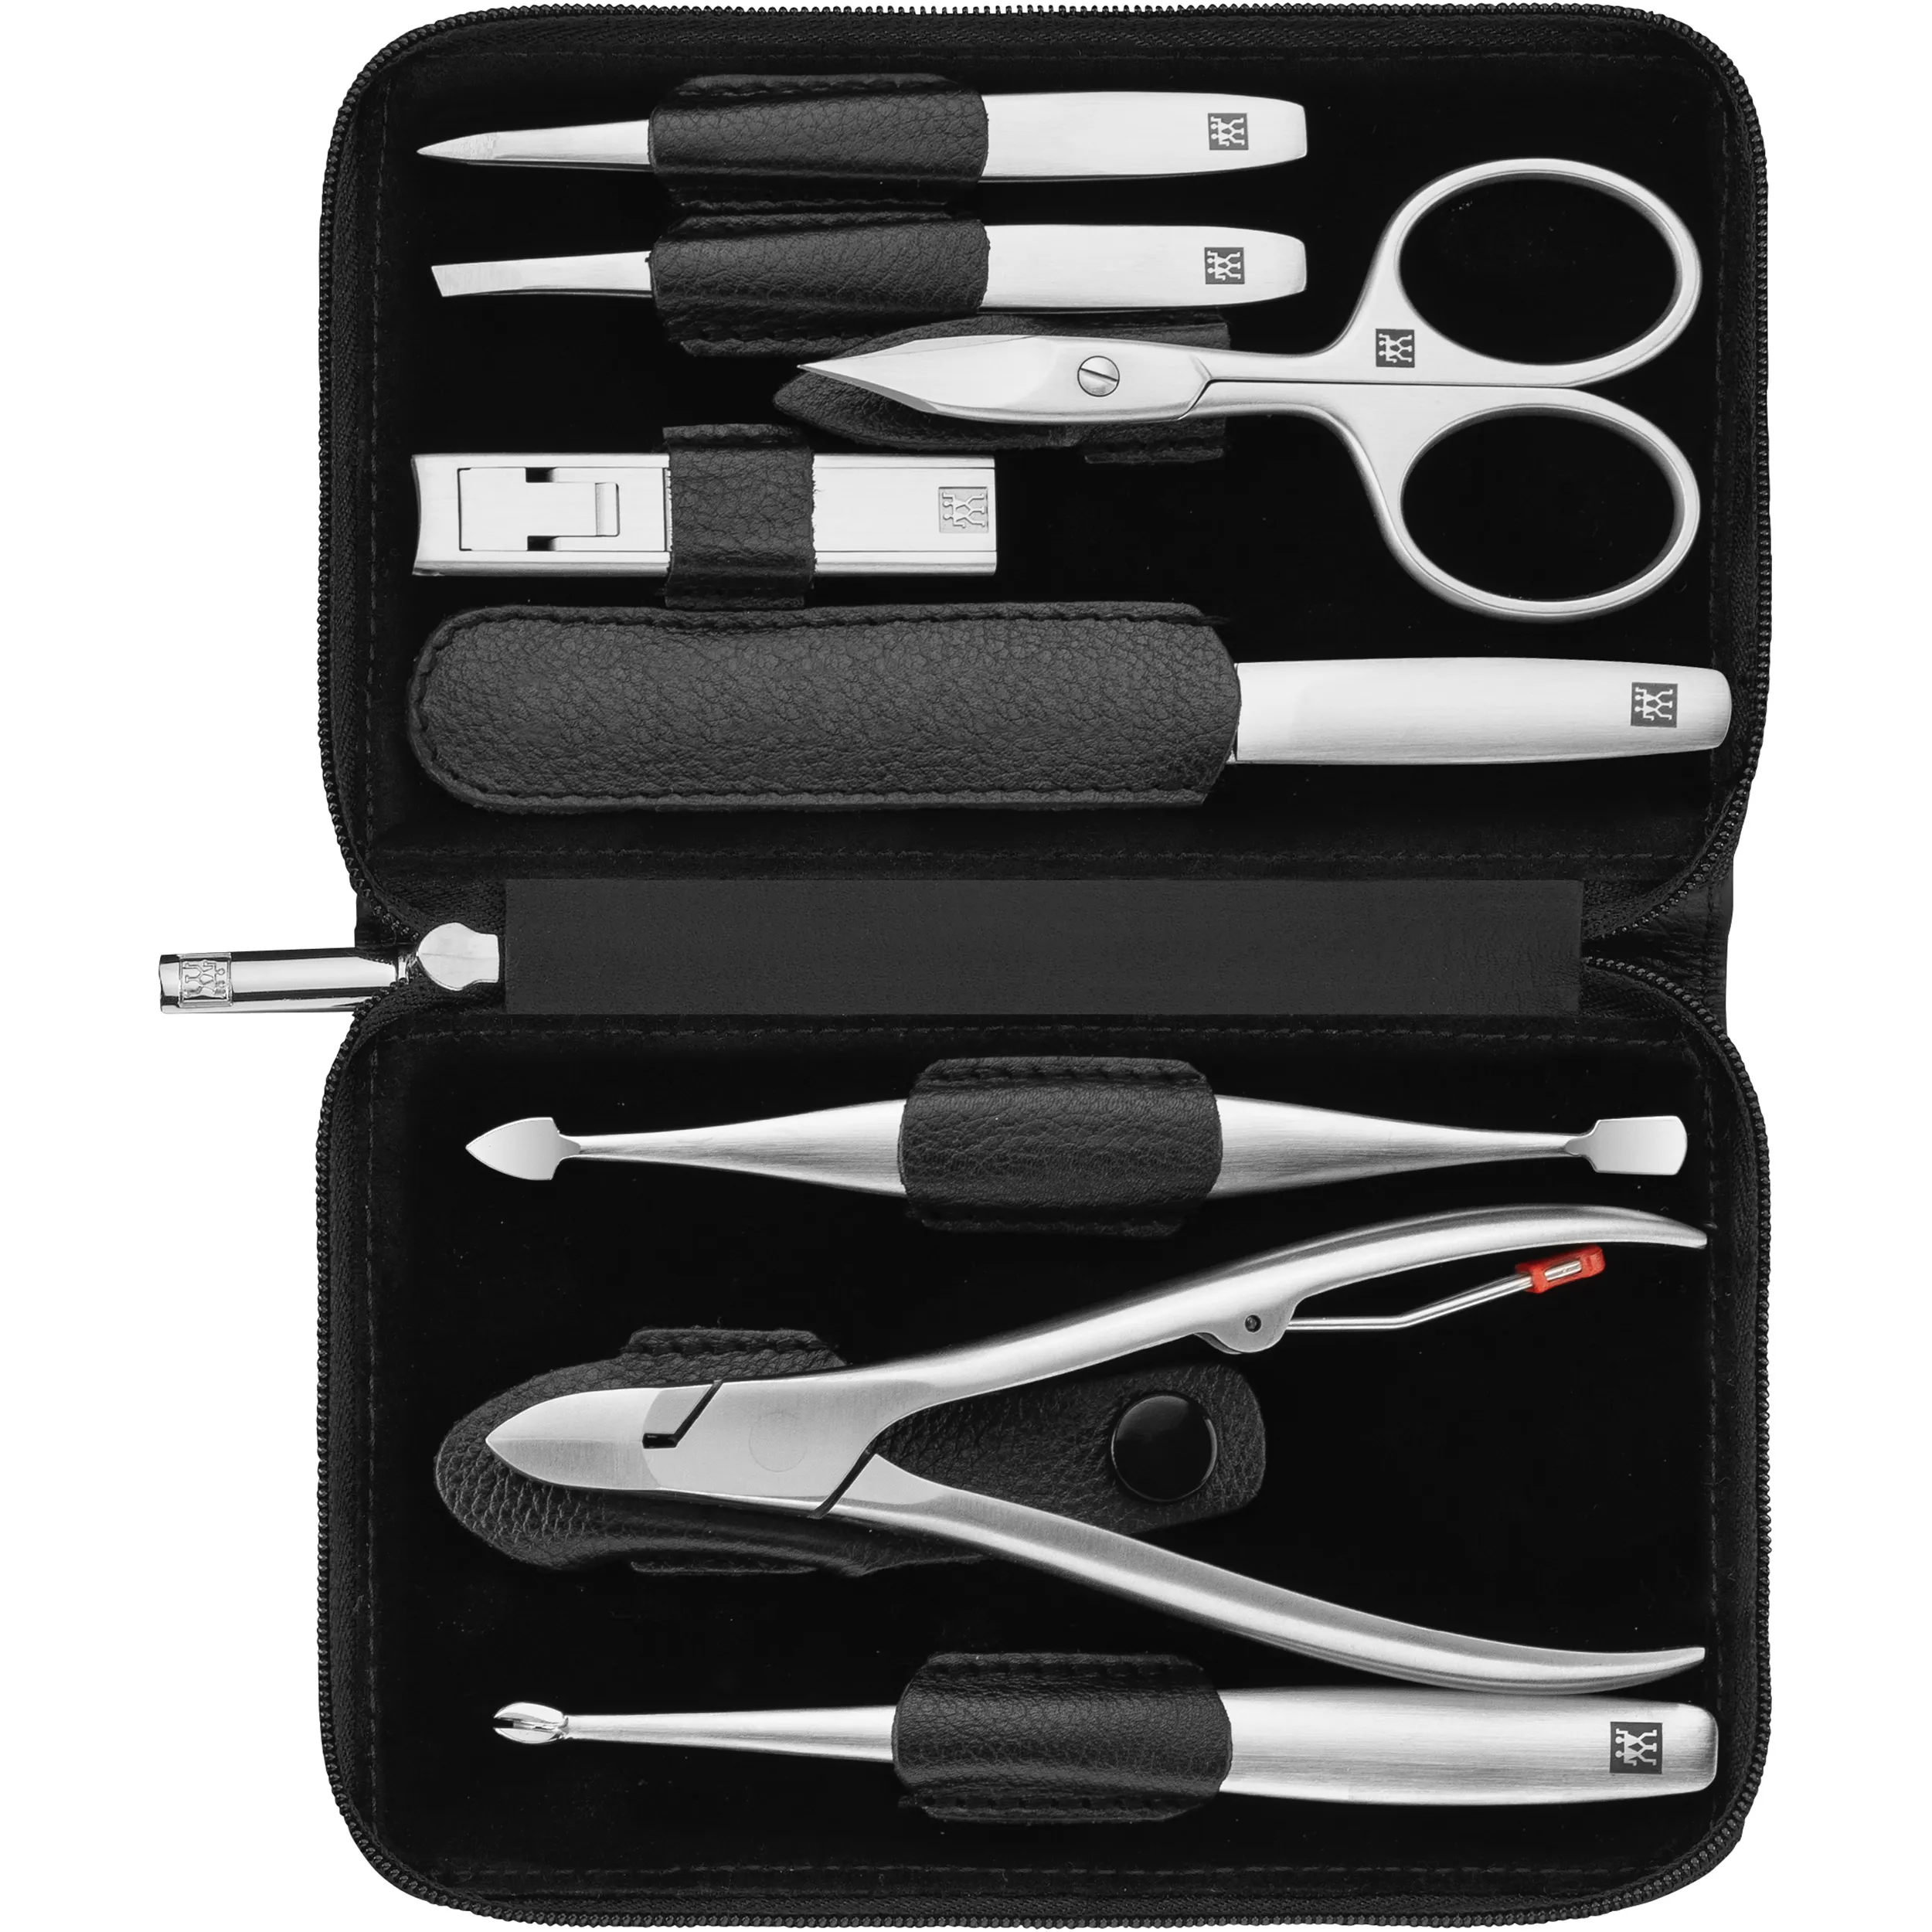 https://www.homethreads.com/files/zwilling/97103-004-3-zwilling-beauty-twinox-9-pc-manicure-set-with-black-nappa-leather-zipper-case-2.webp